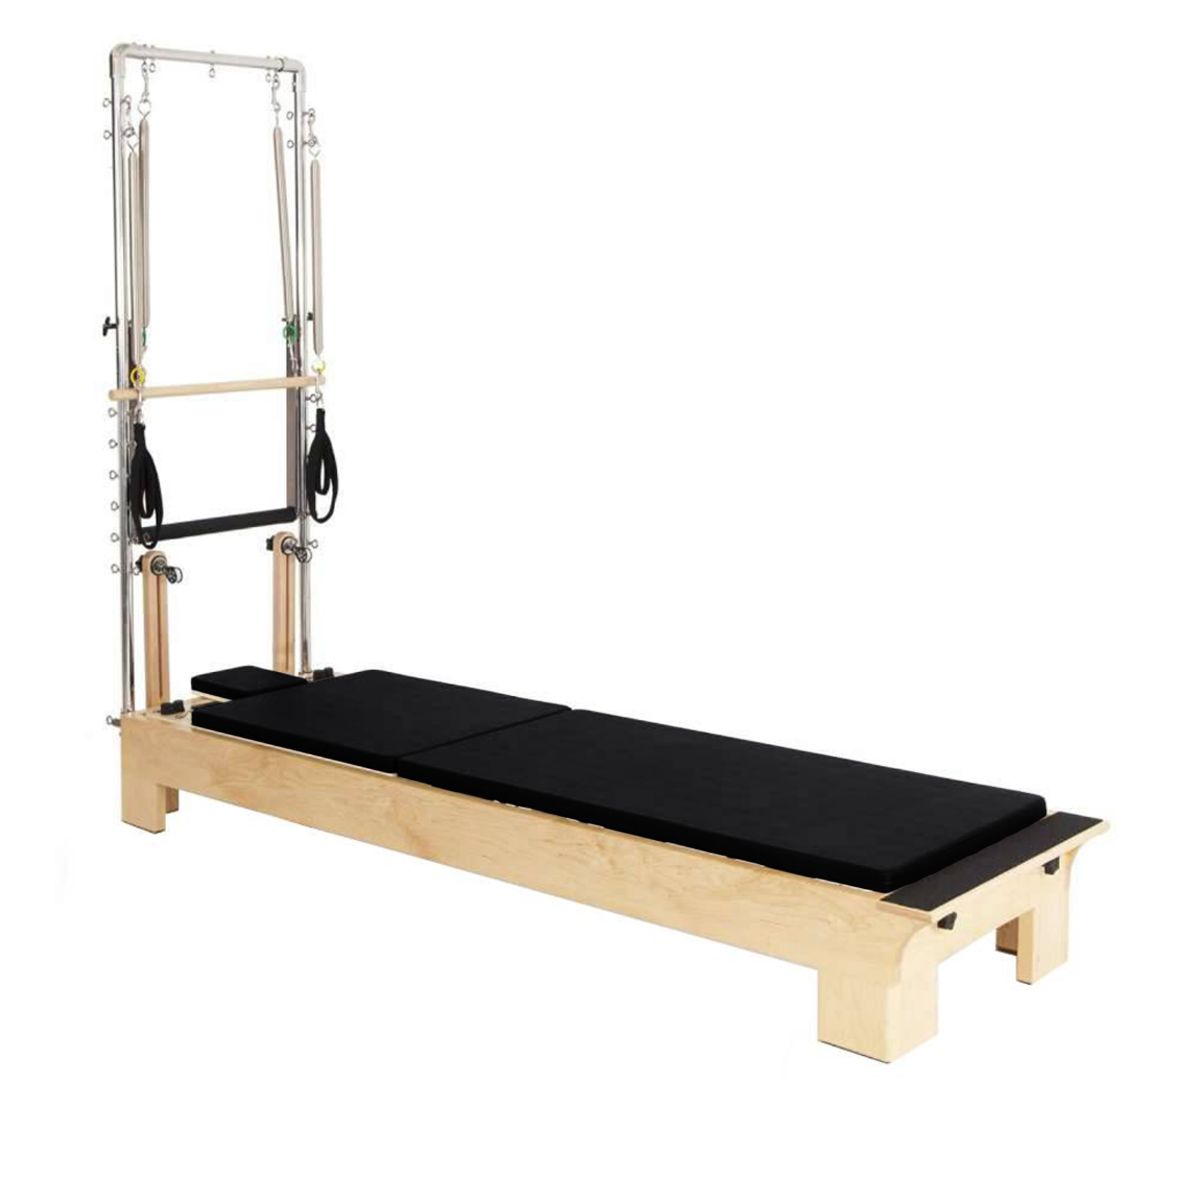  Wood Pilates Reformer with Tower, Pilates Reformer